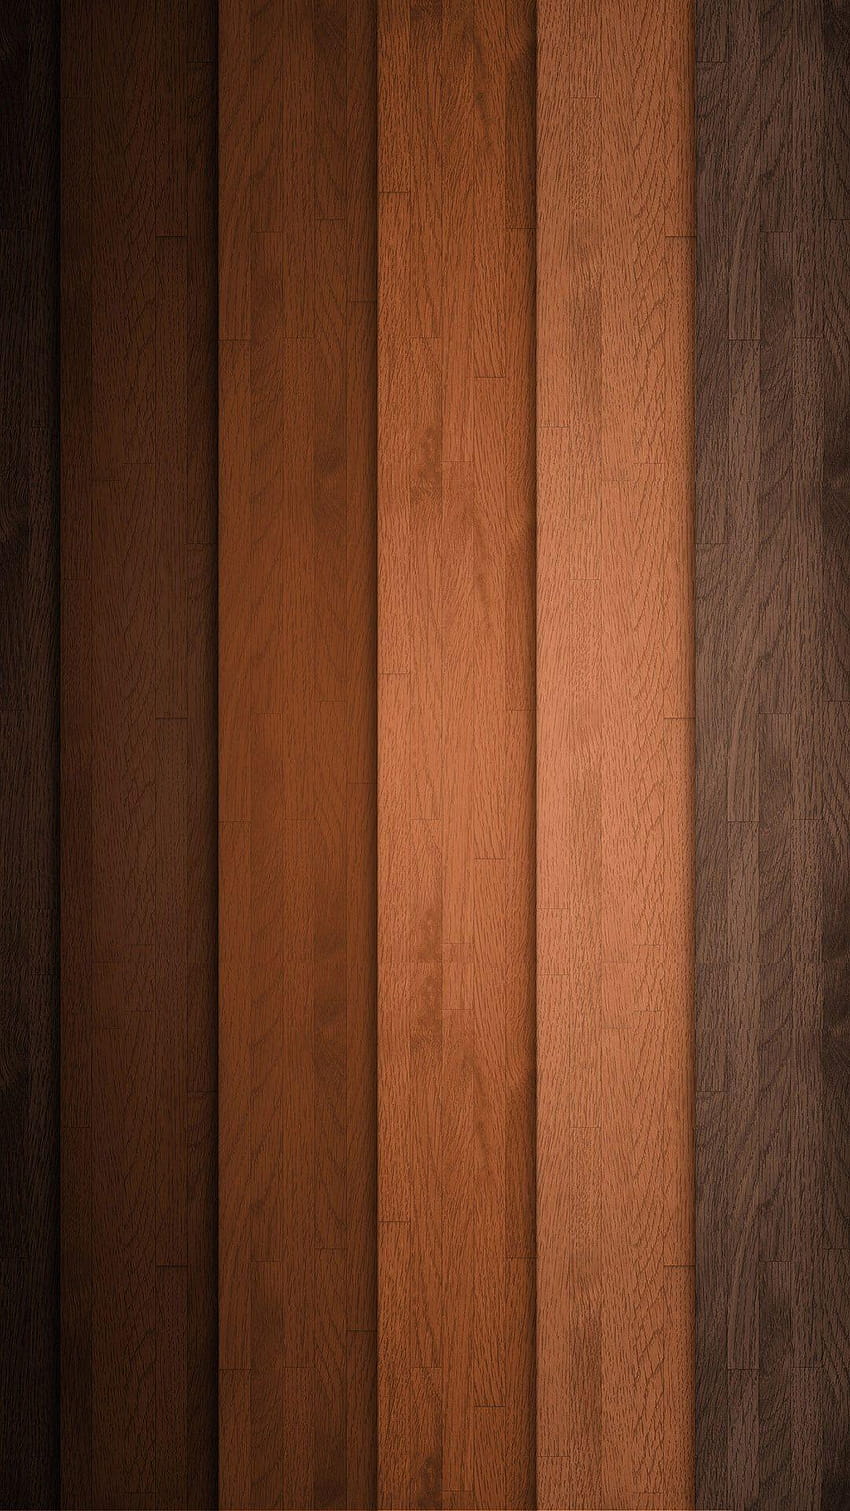 Wood Planks Texture Backgrounds Shades Of Brown Android, สีน้ำตาล วอลล์เปเปอร์โทรศัพท์ HD